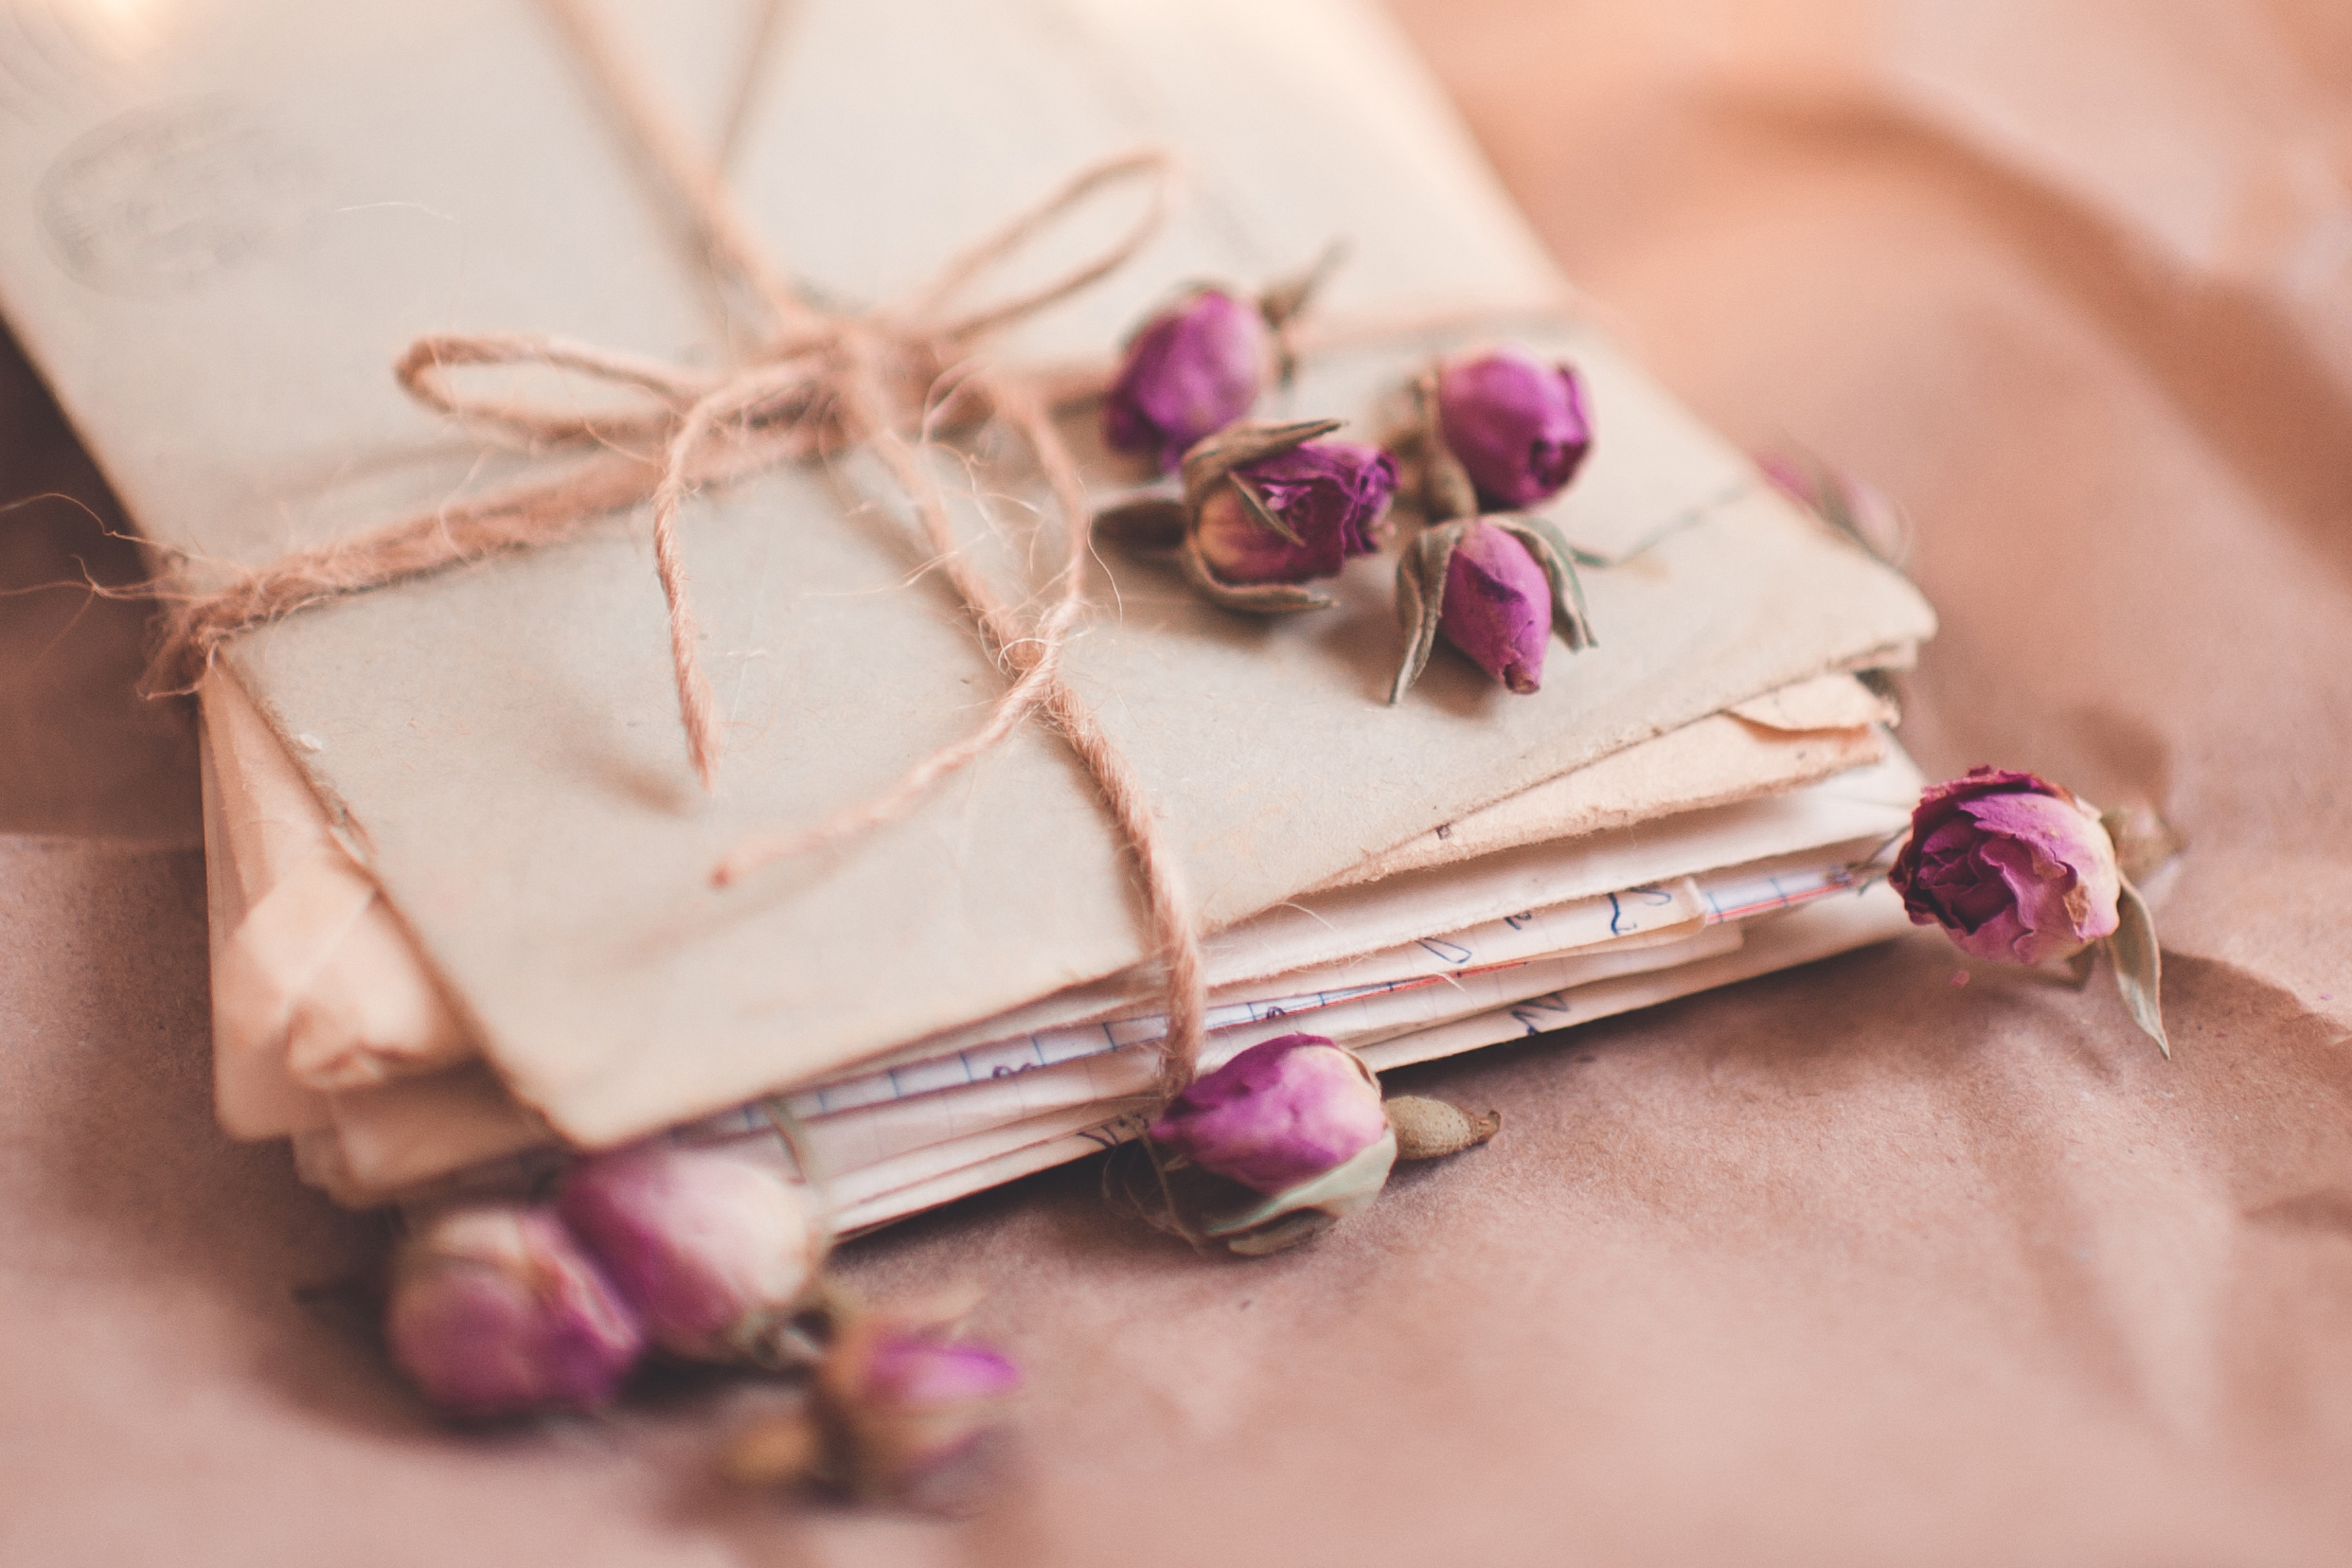 A stack of paper letters and dry flowers | Source: Shutterstock